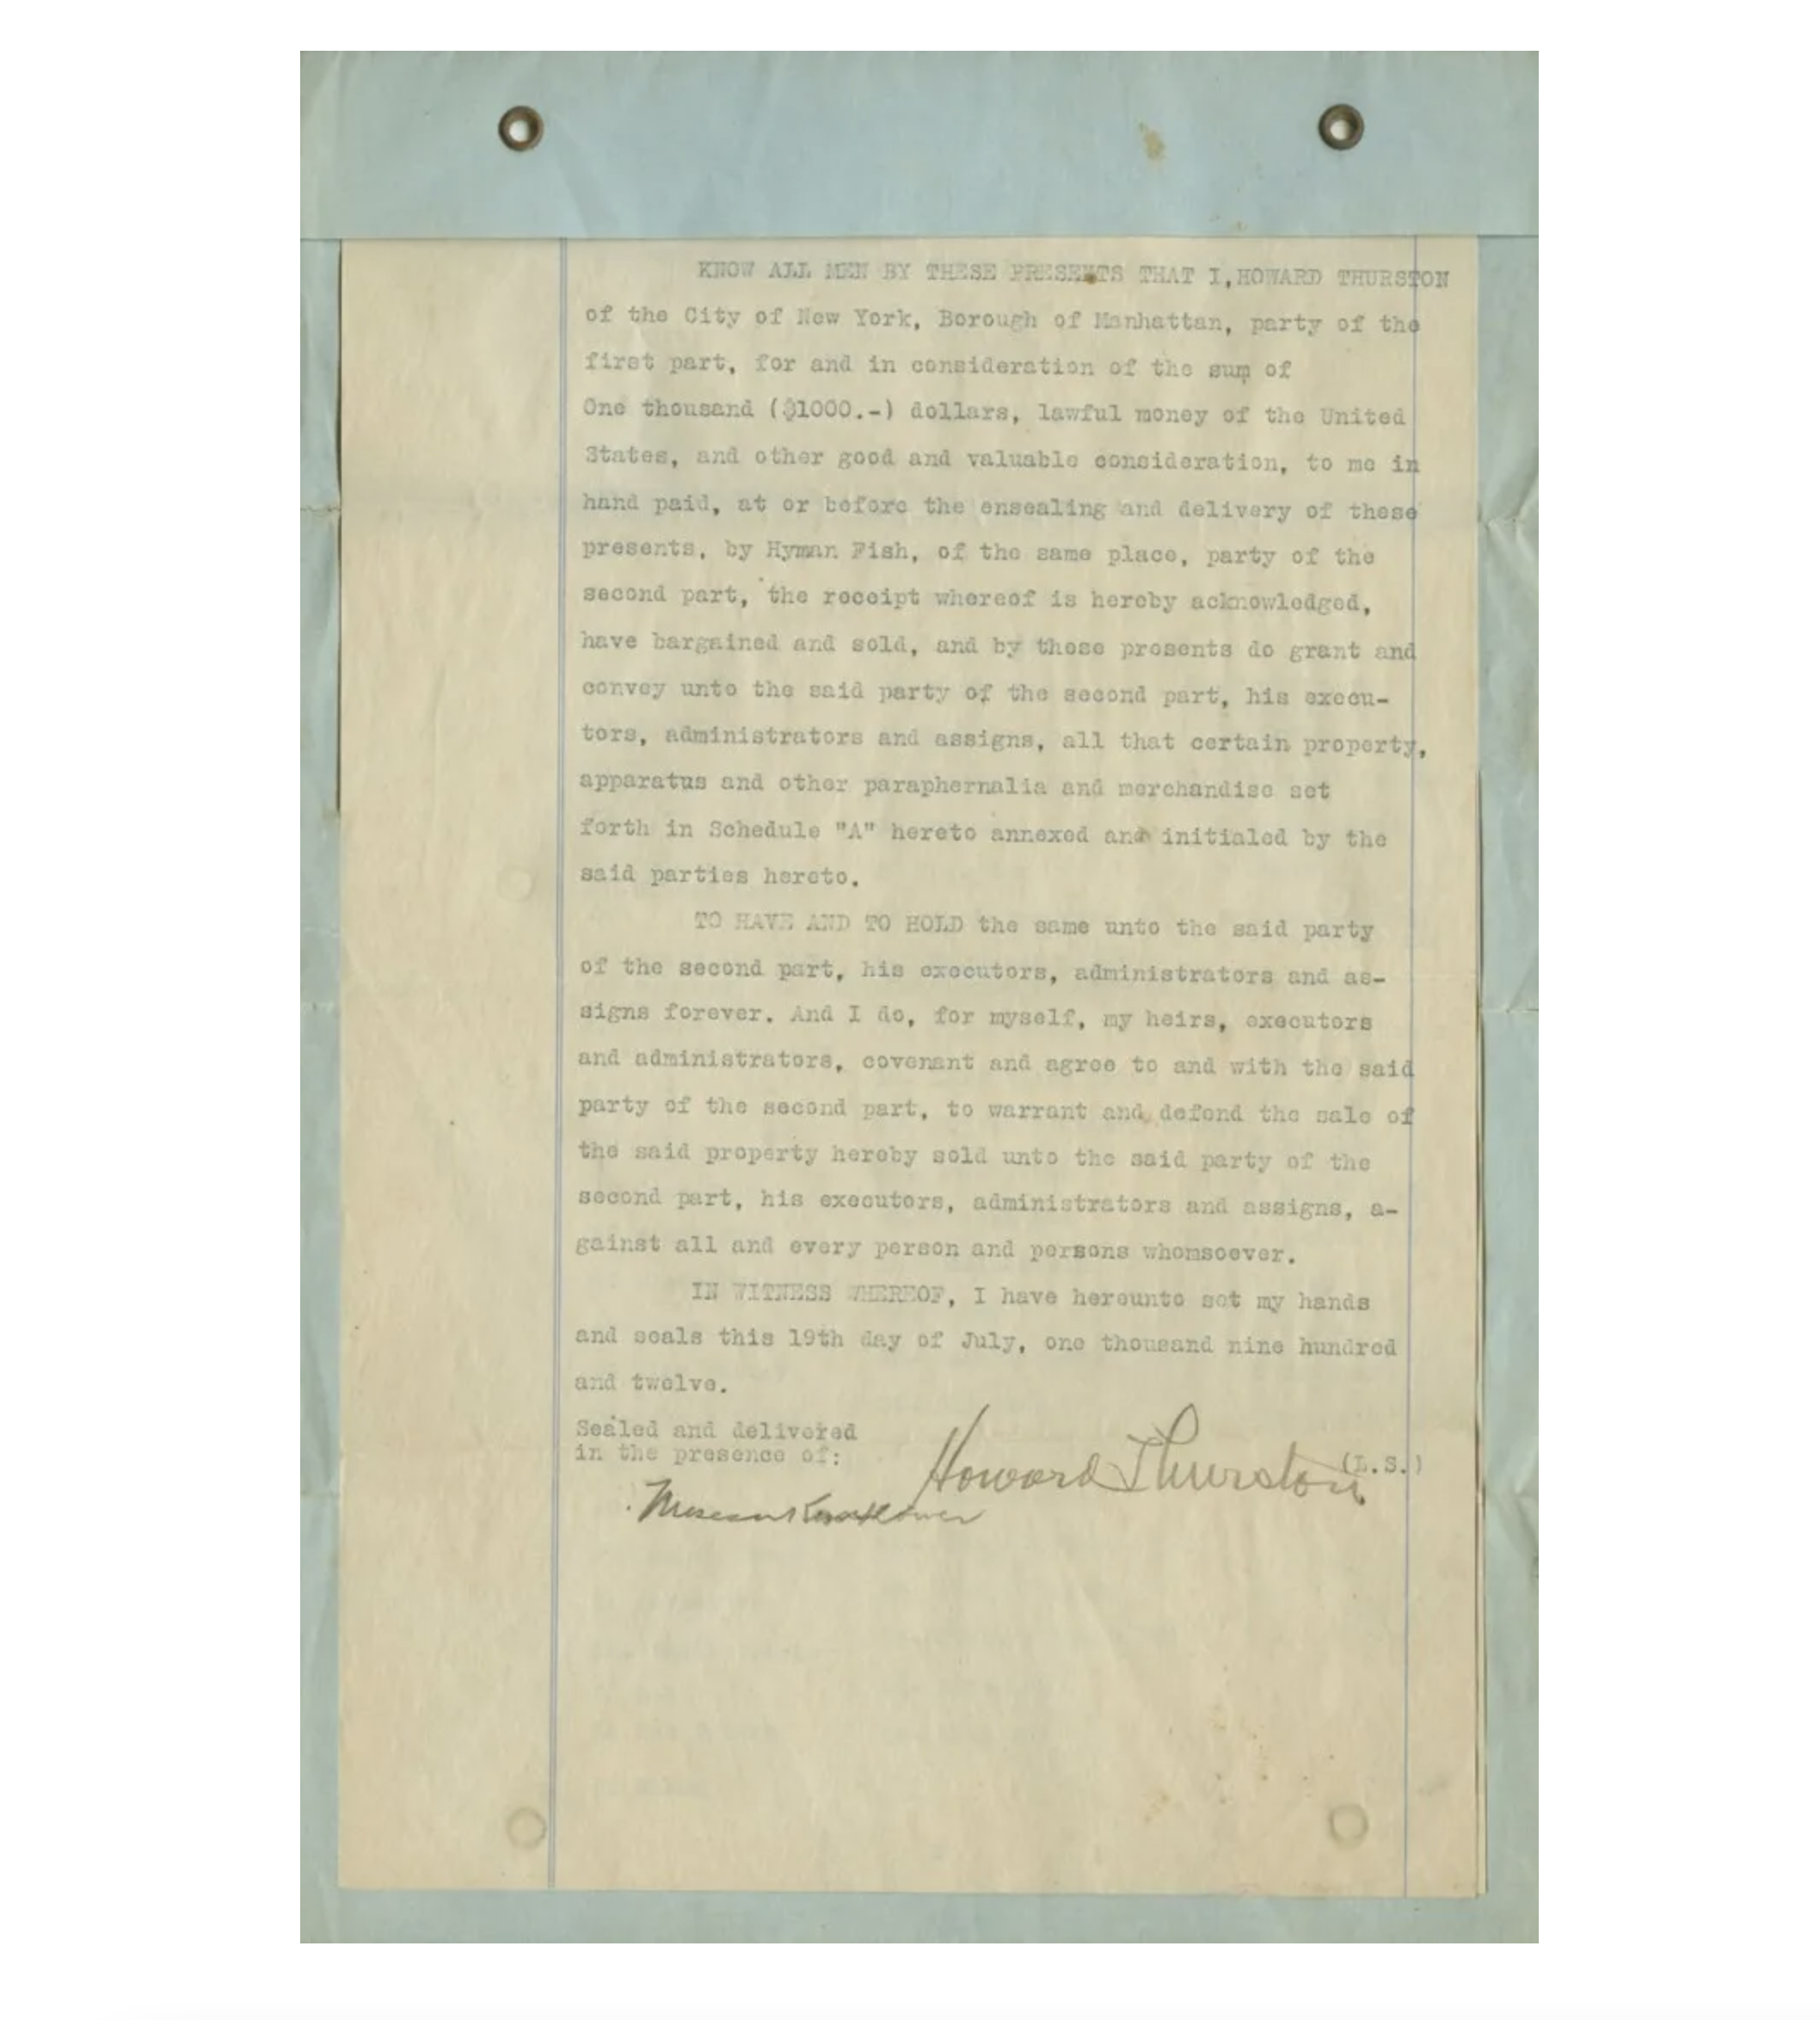 Important loan document signed by Howard Thurston